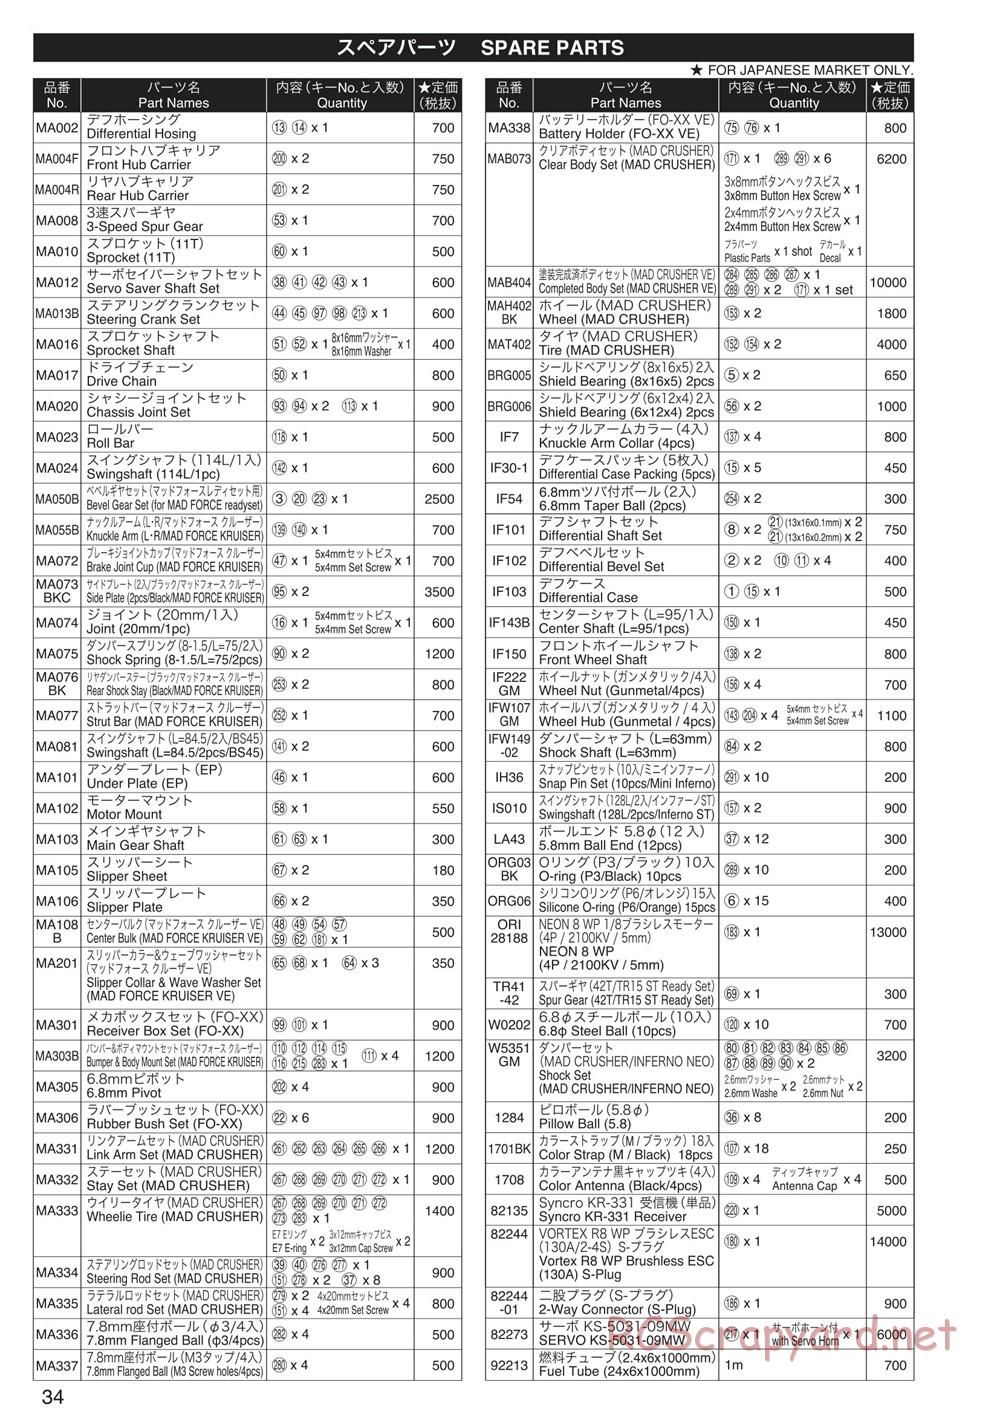 Kyosho - Mad Crusher VE - Manual - Page 33